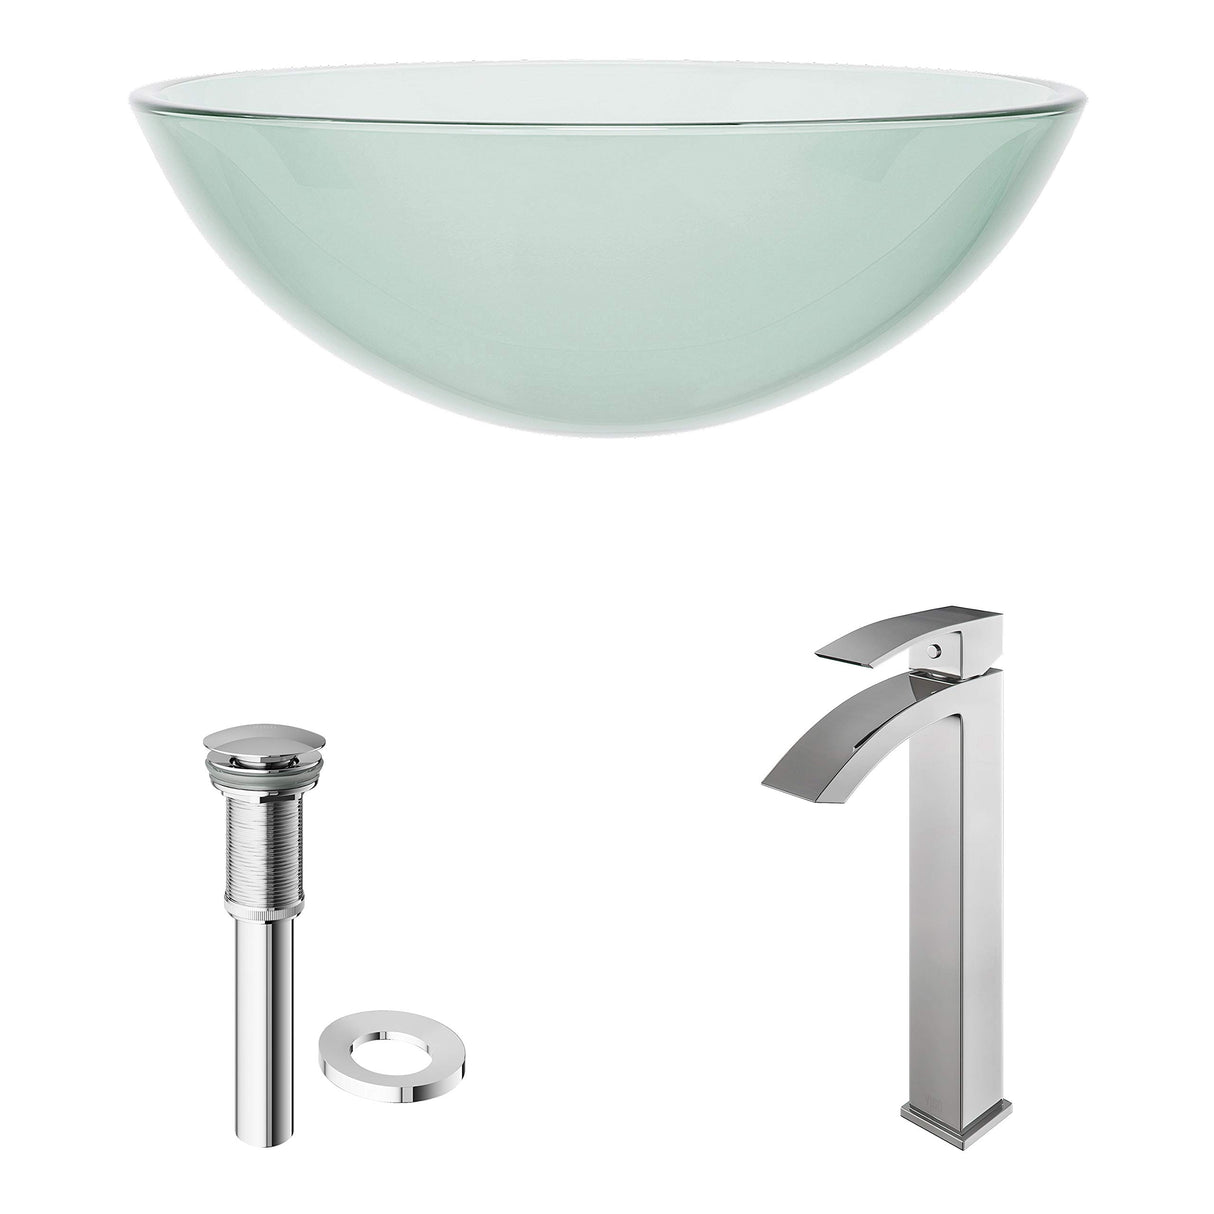 VIGO VGT890 16.5" L -16.5" W -12.0" H Handmade Countertop Glass Round Vessel Bathroom Sink Set in Iridescent Finish with Chrome Single-Handle Single Hole Faucet and Pop Up Drain